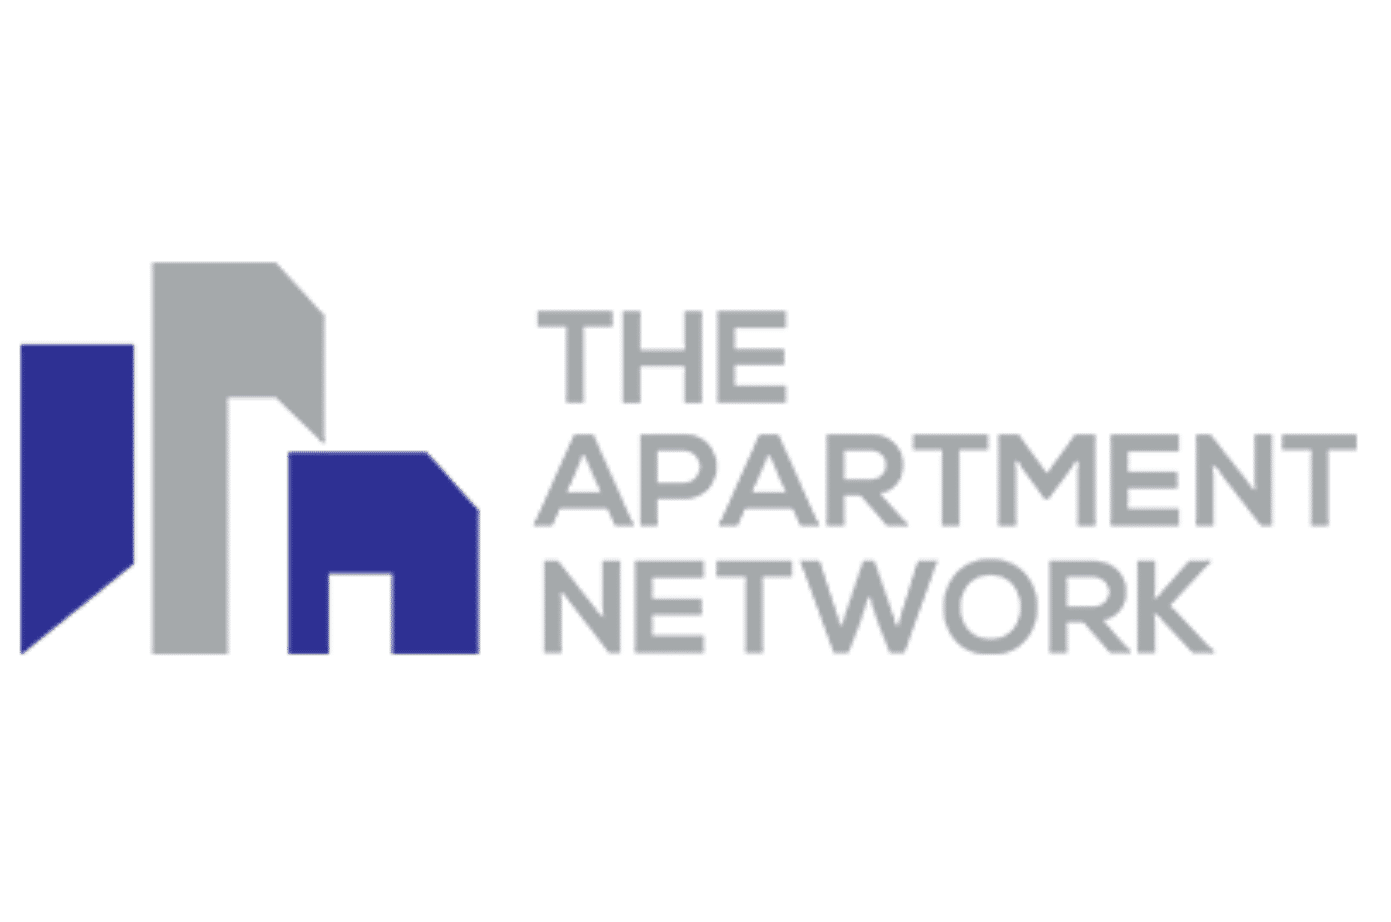 The Apartment Network Adds Carbon Offsetting | Corporate Housing Providers Association - CHPA